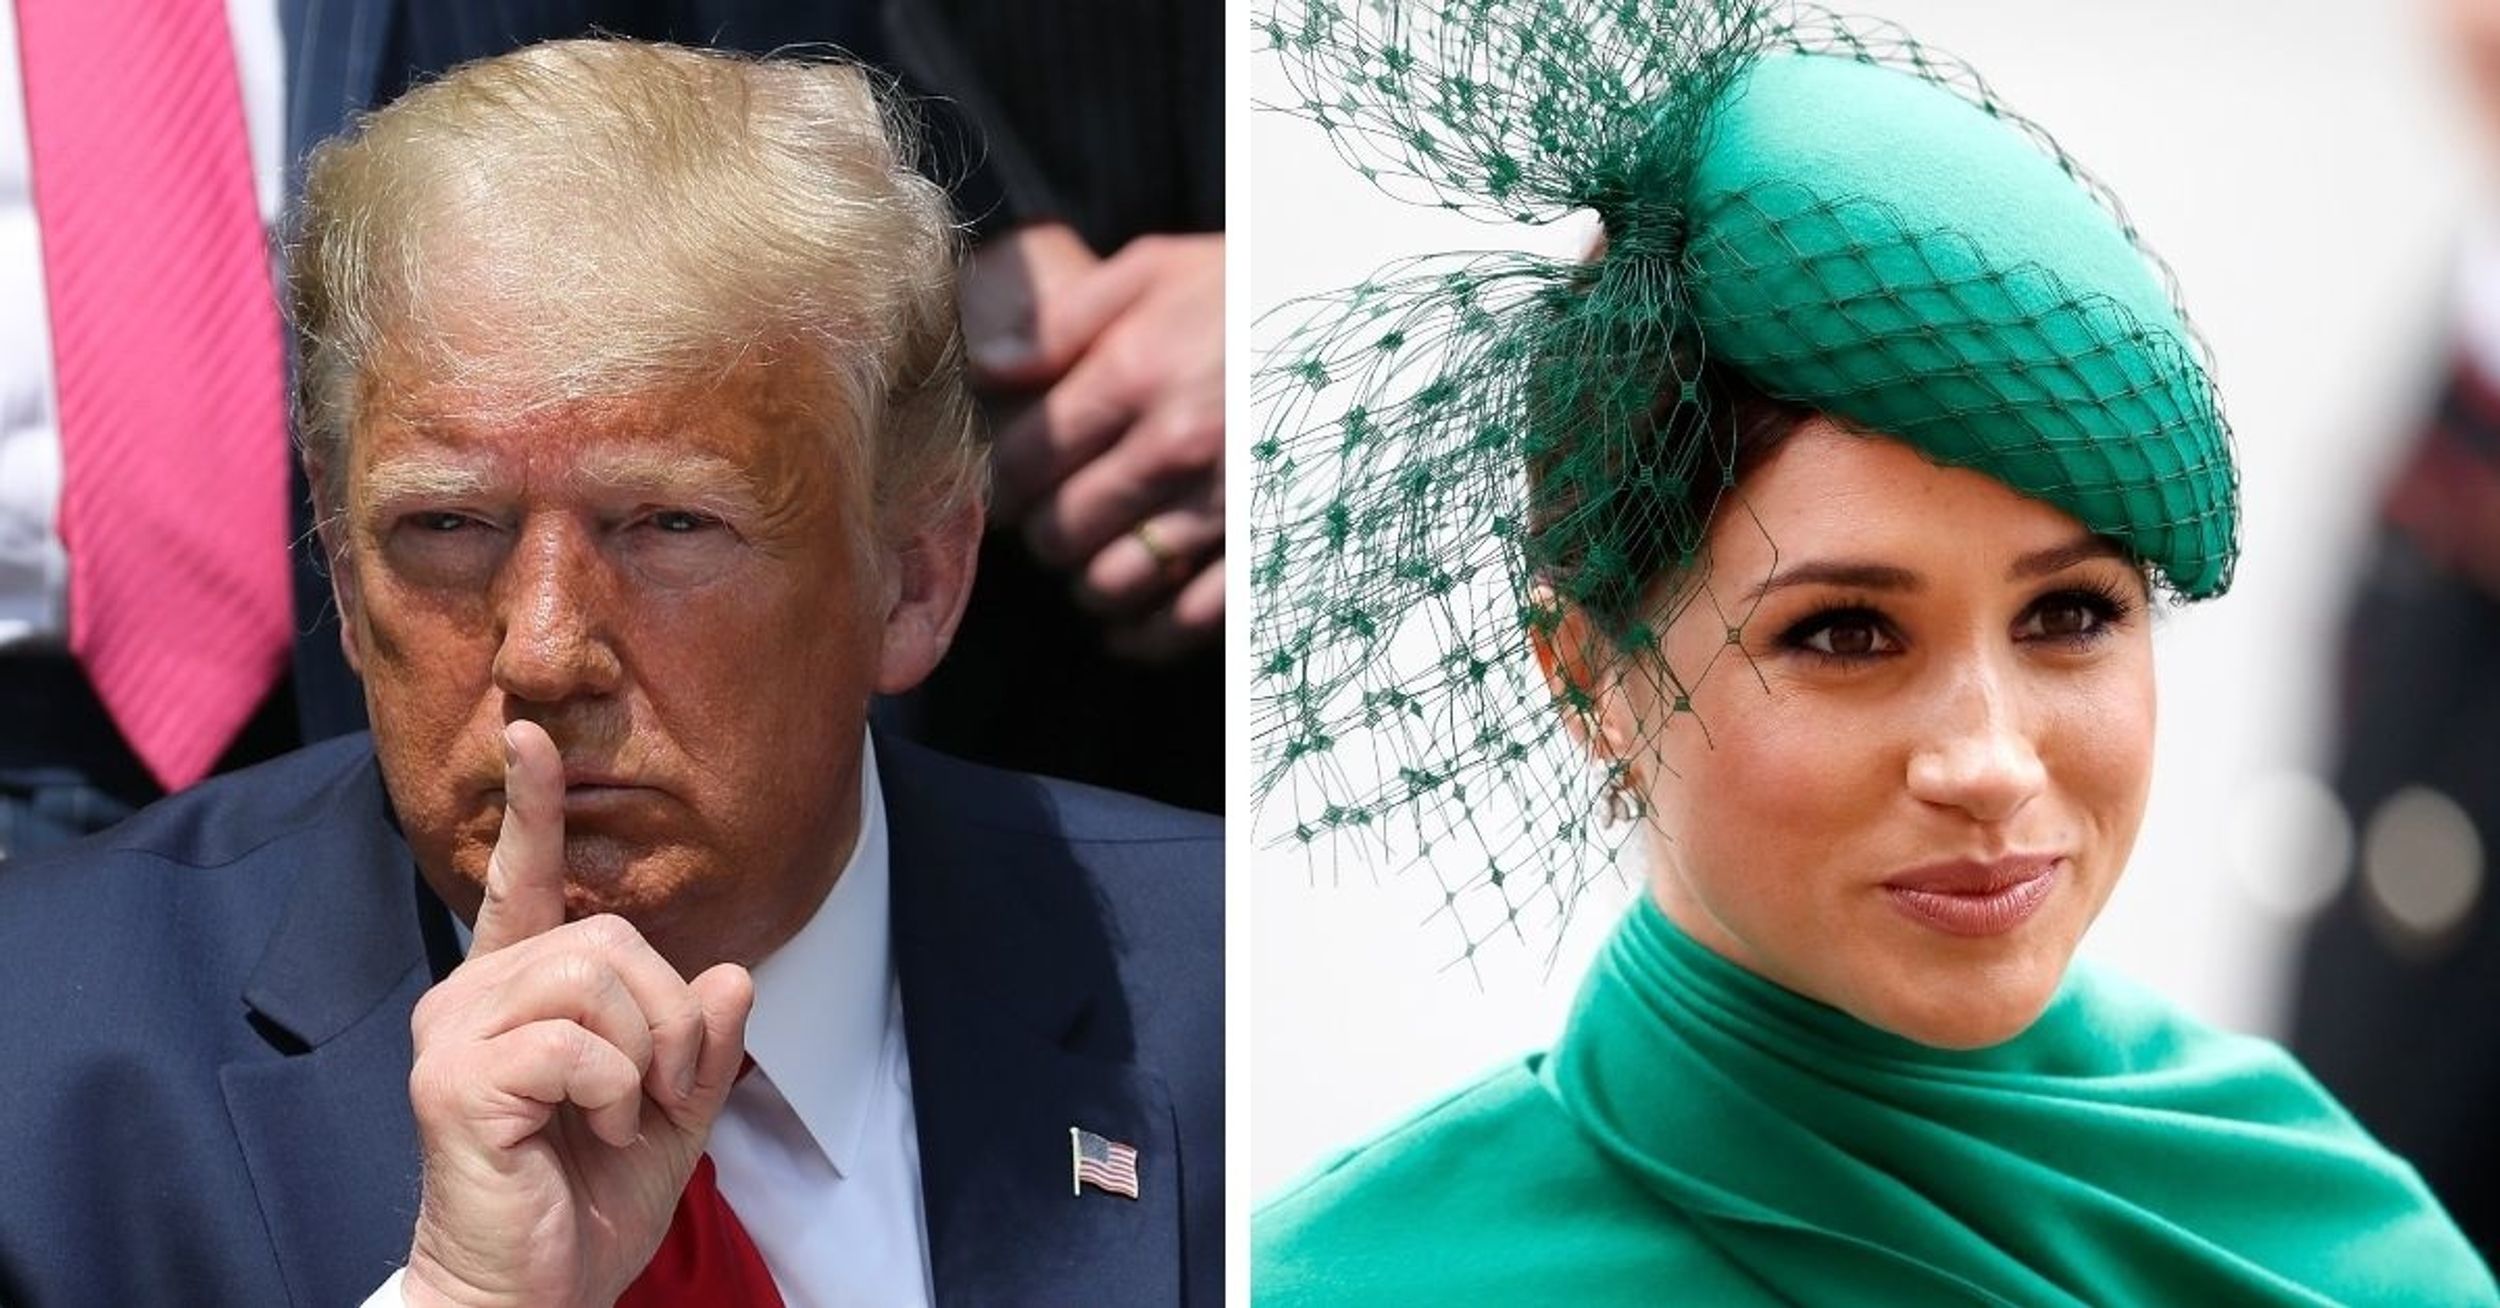 Trump Dragged For Insulting Meghan Markle After All She Did Was Encourage People To Vote